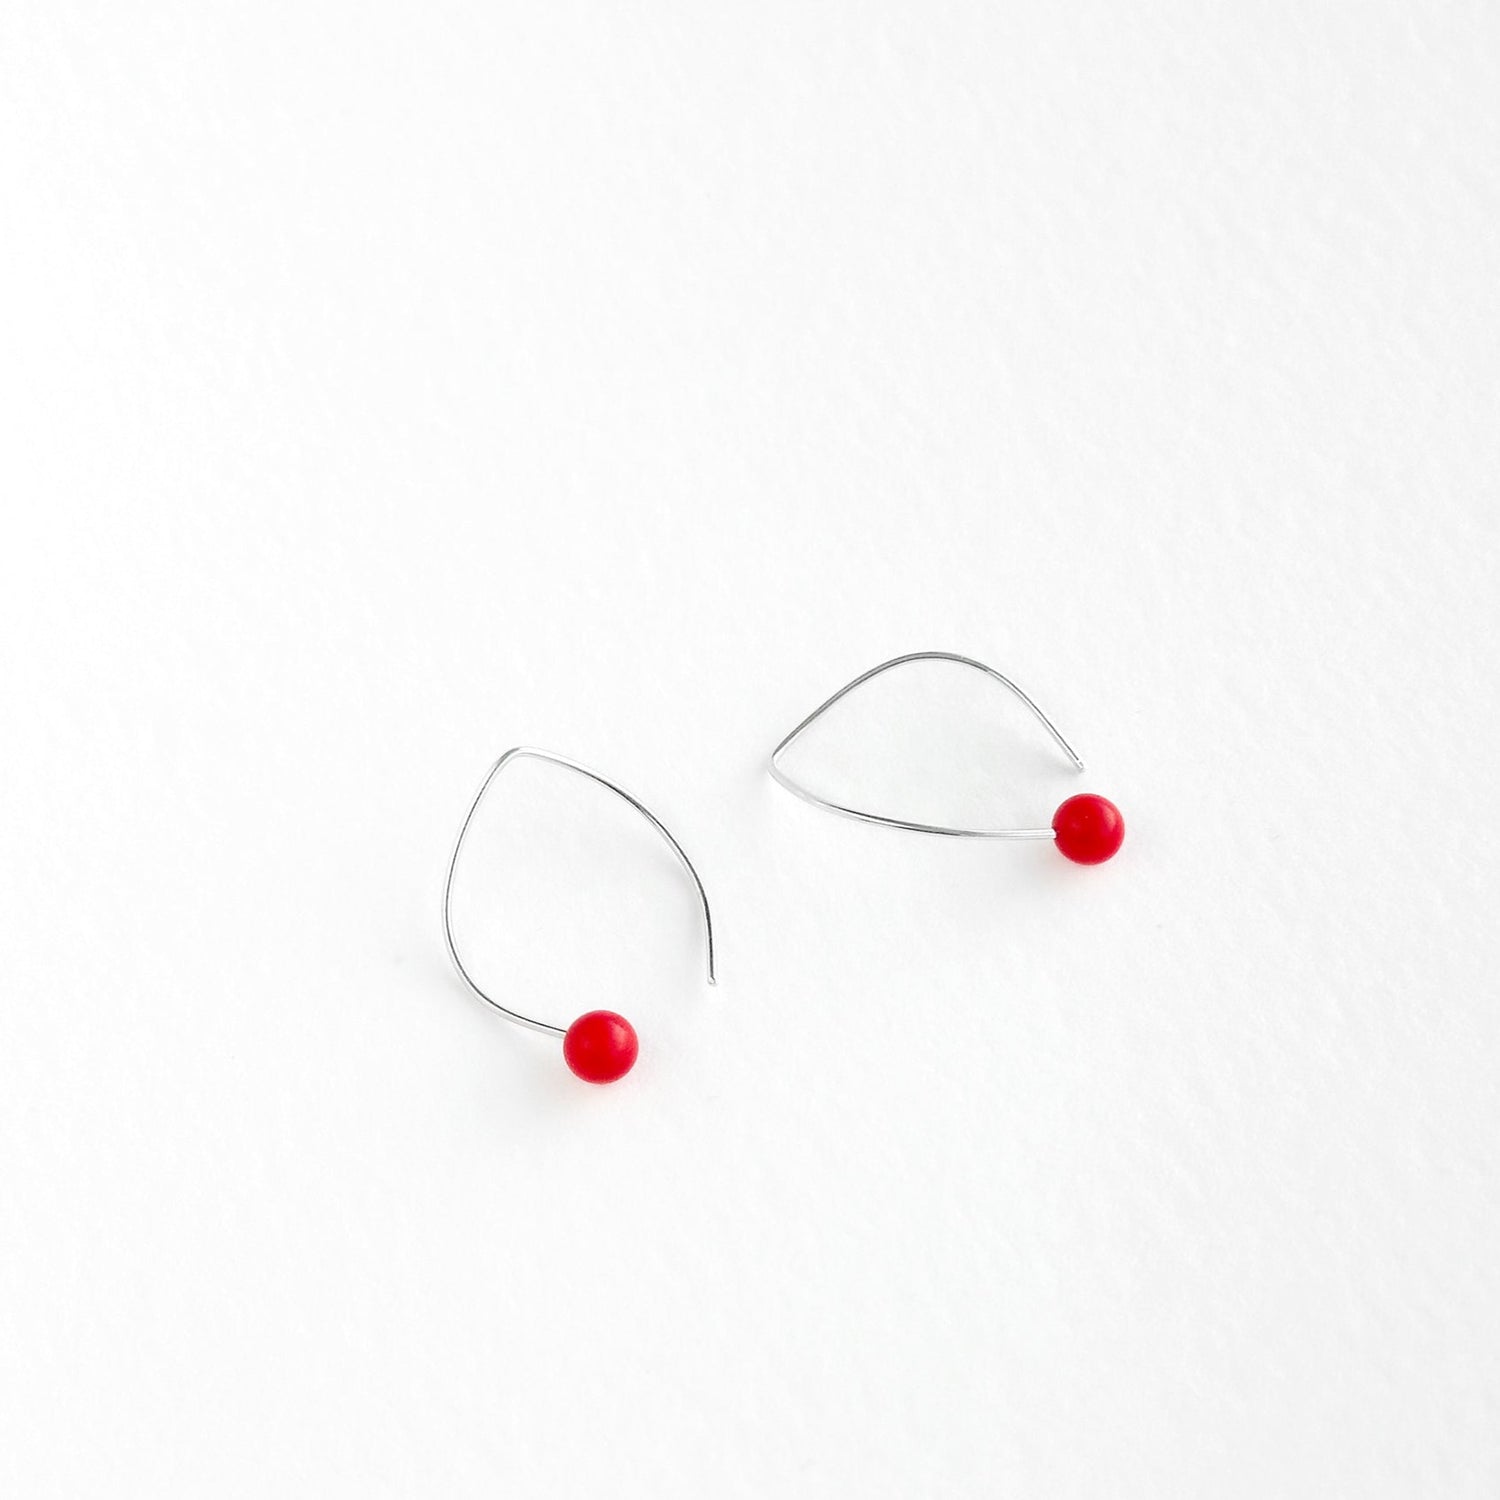 Handmade sterling silver hook earrings with a red tagua nut bead